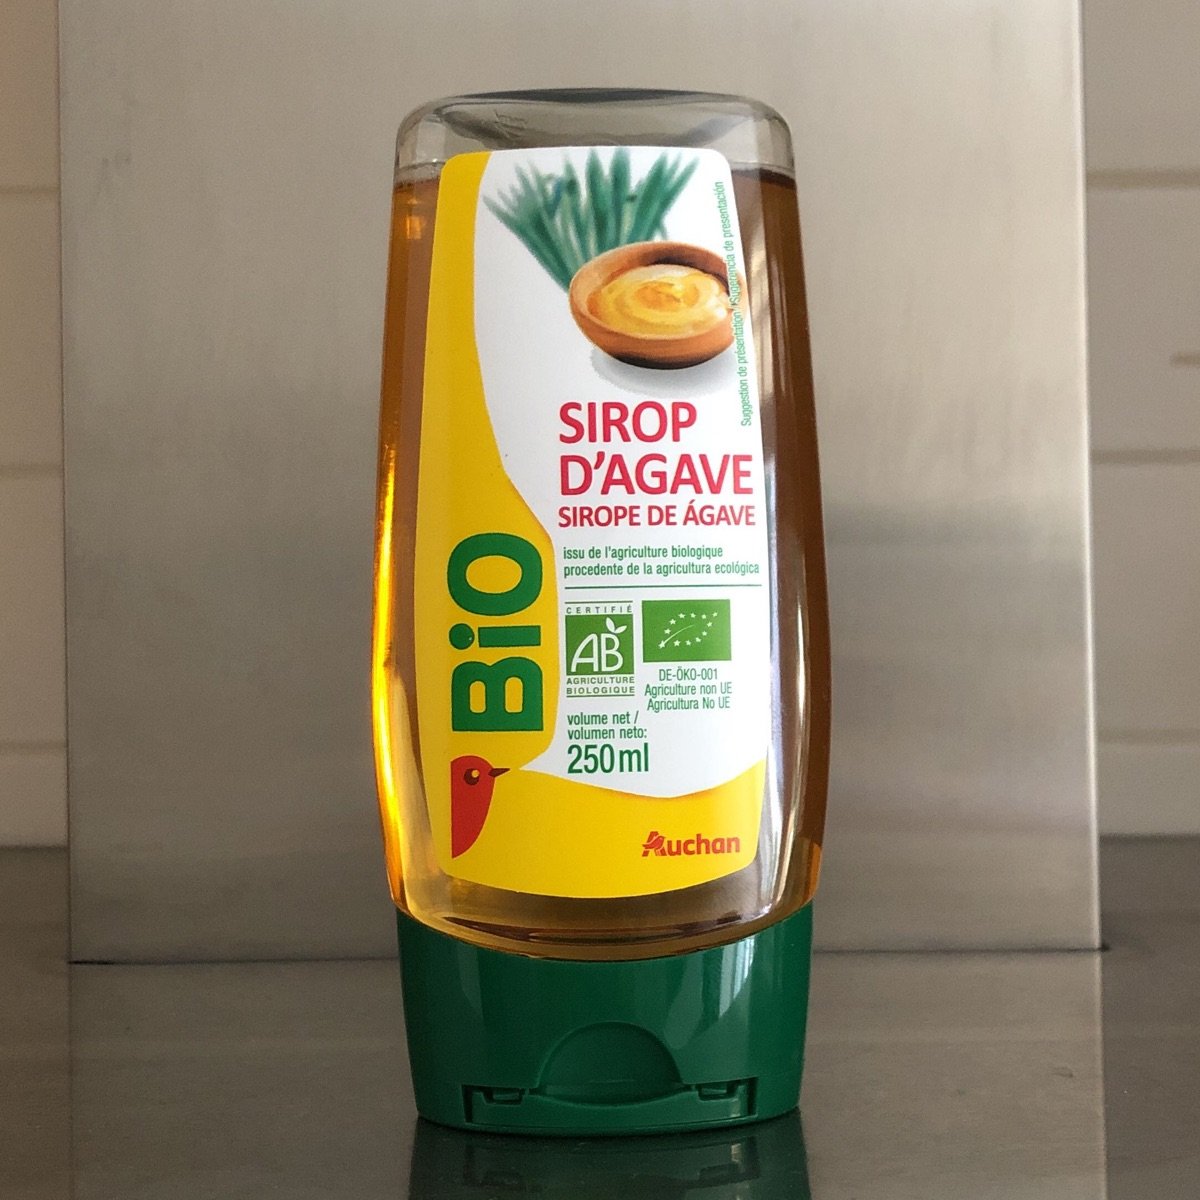 Auchan Sirop d'agave Review